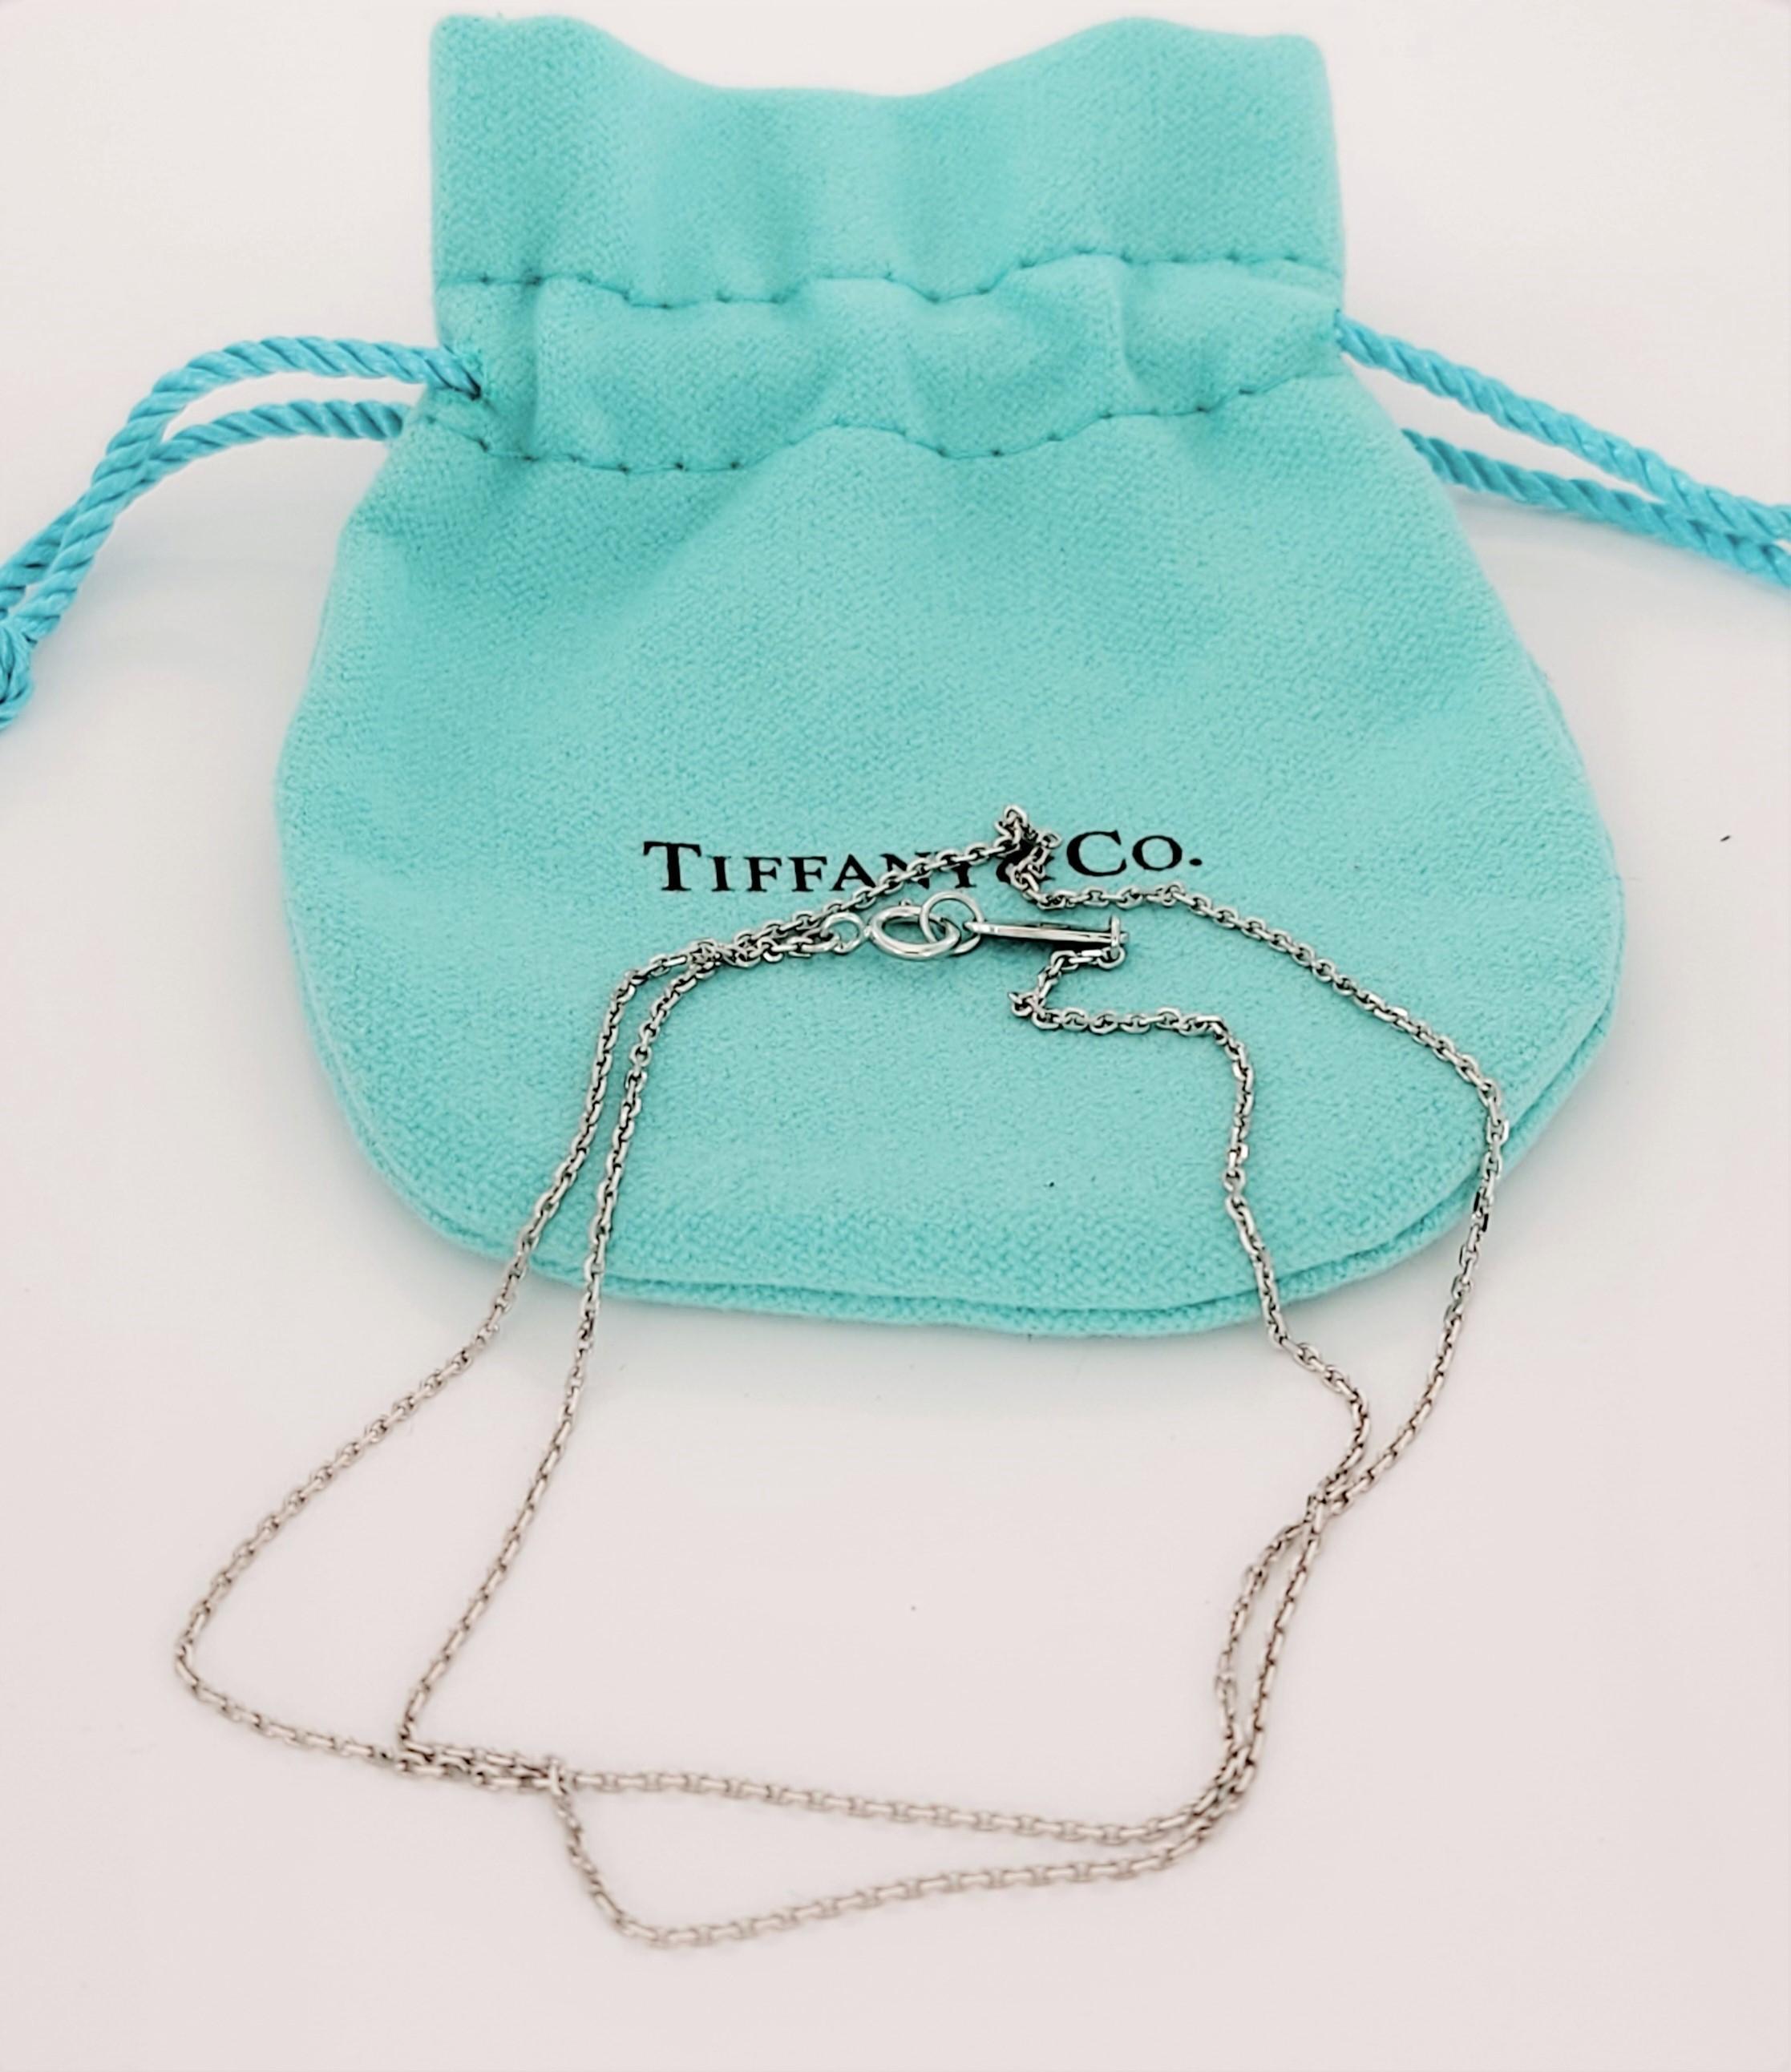 Brand Tiffany& co 
Material  PT950
Chain Length 16''
Chain is not Adjustable 
Weight 1.8gr
Condition New, Never worn
Comes with Tiffany & co pouch